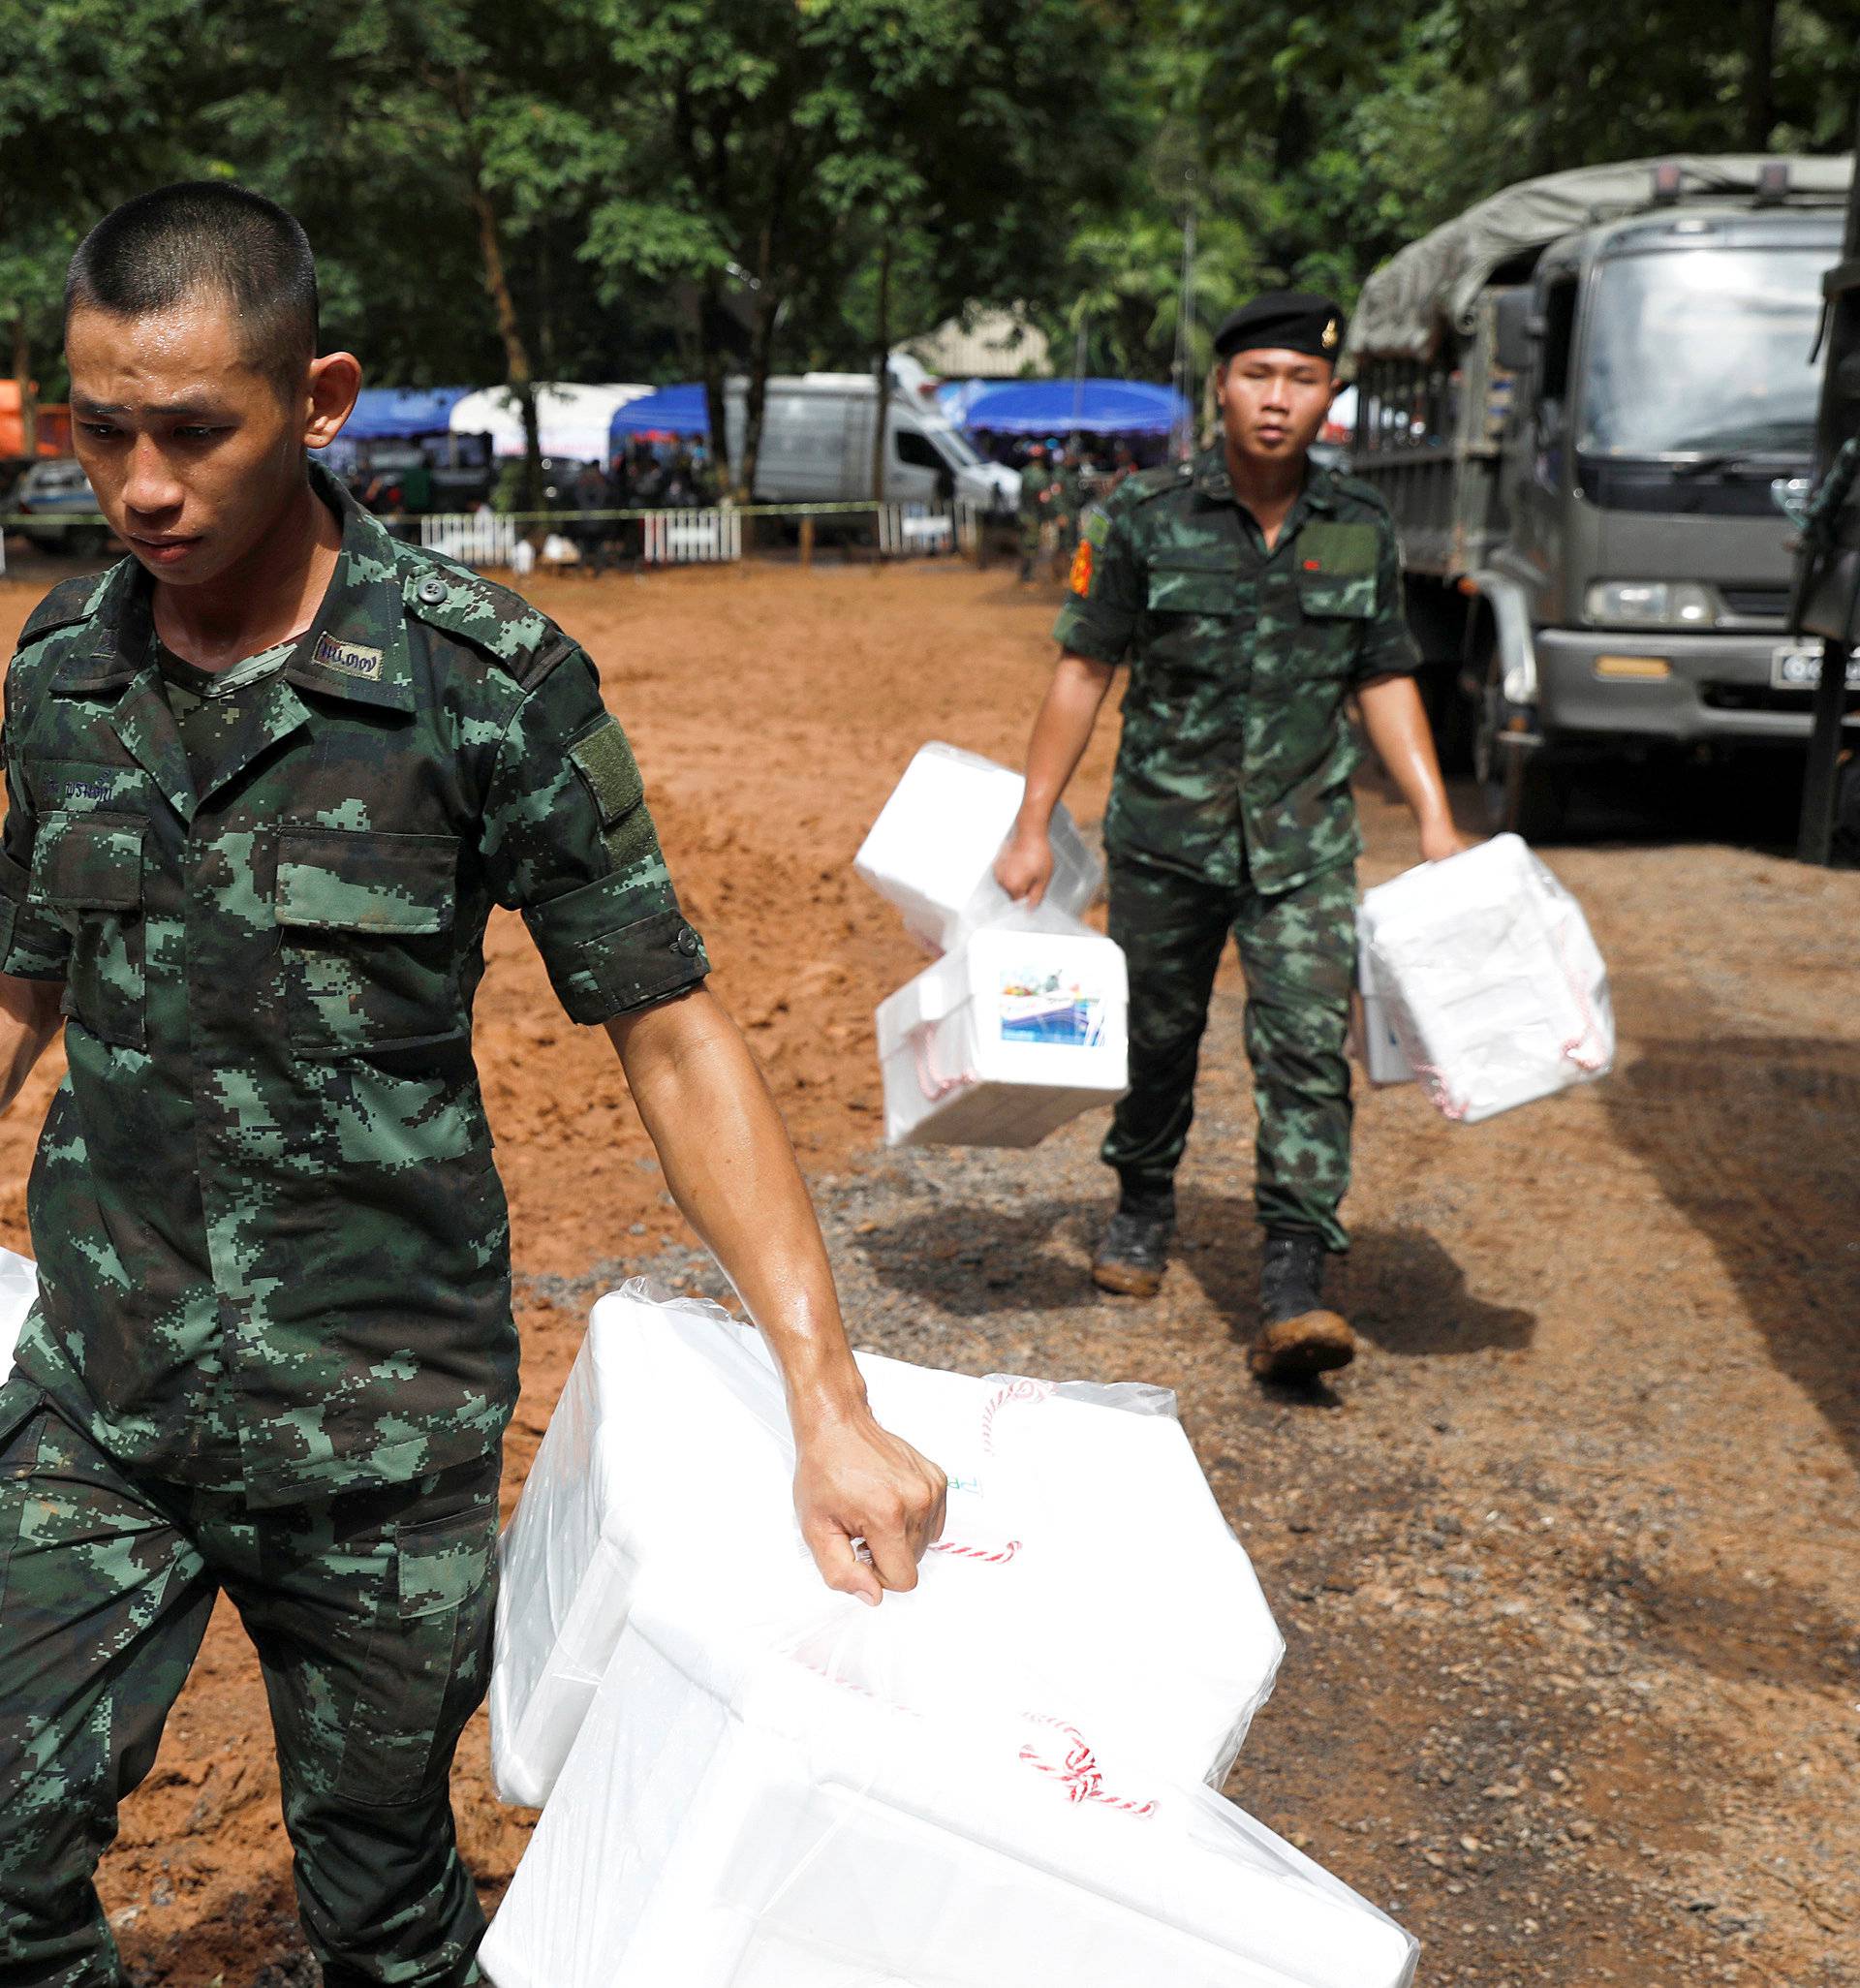 Soldiers unload aids near the Tham Luang cave complex, as a search for members of an under-16 soccer team and their coach continues, in the northern province of Chiang Rai